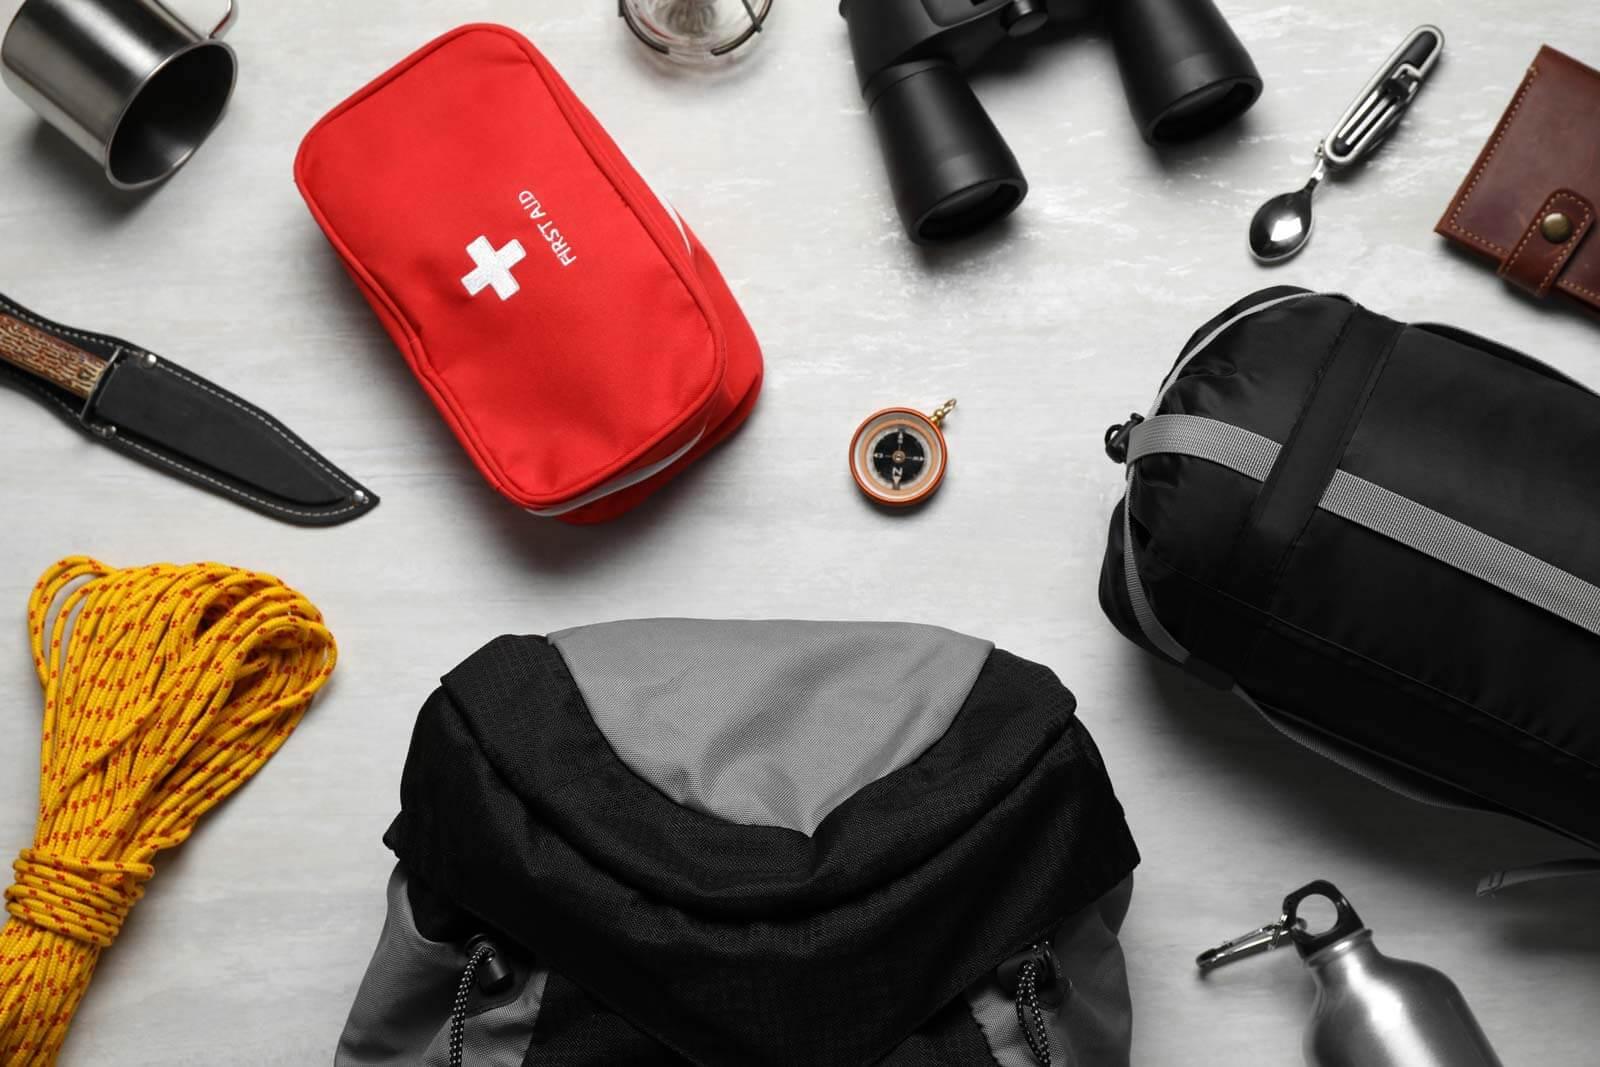 Essentials laid out, including a first aid kit, knife, rope, and backpack